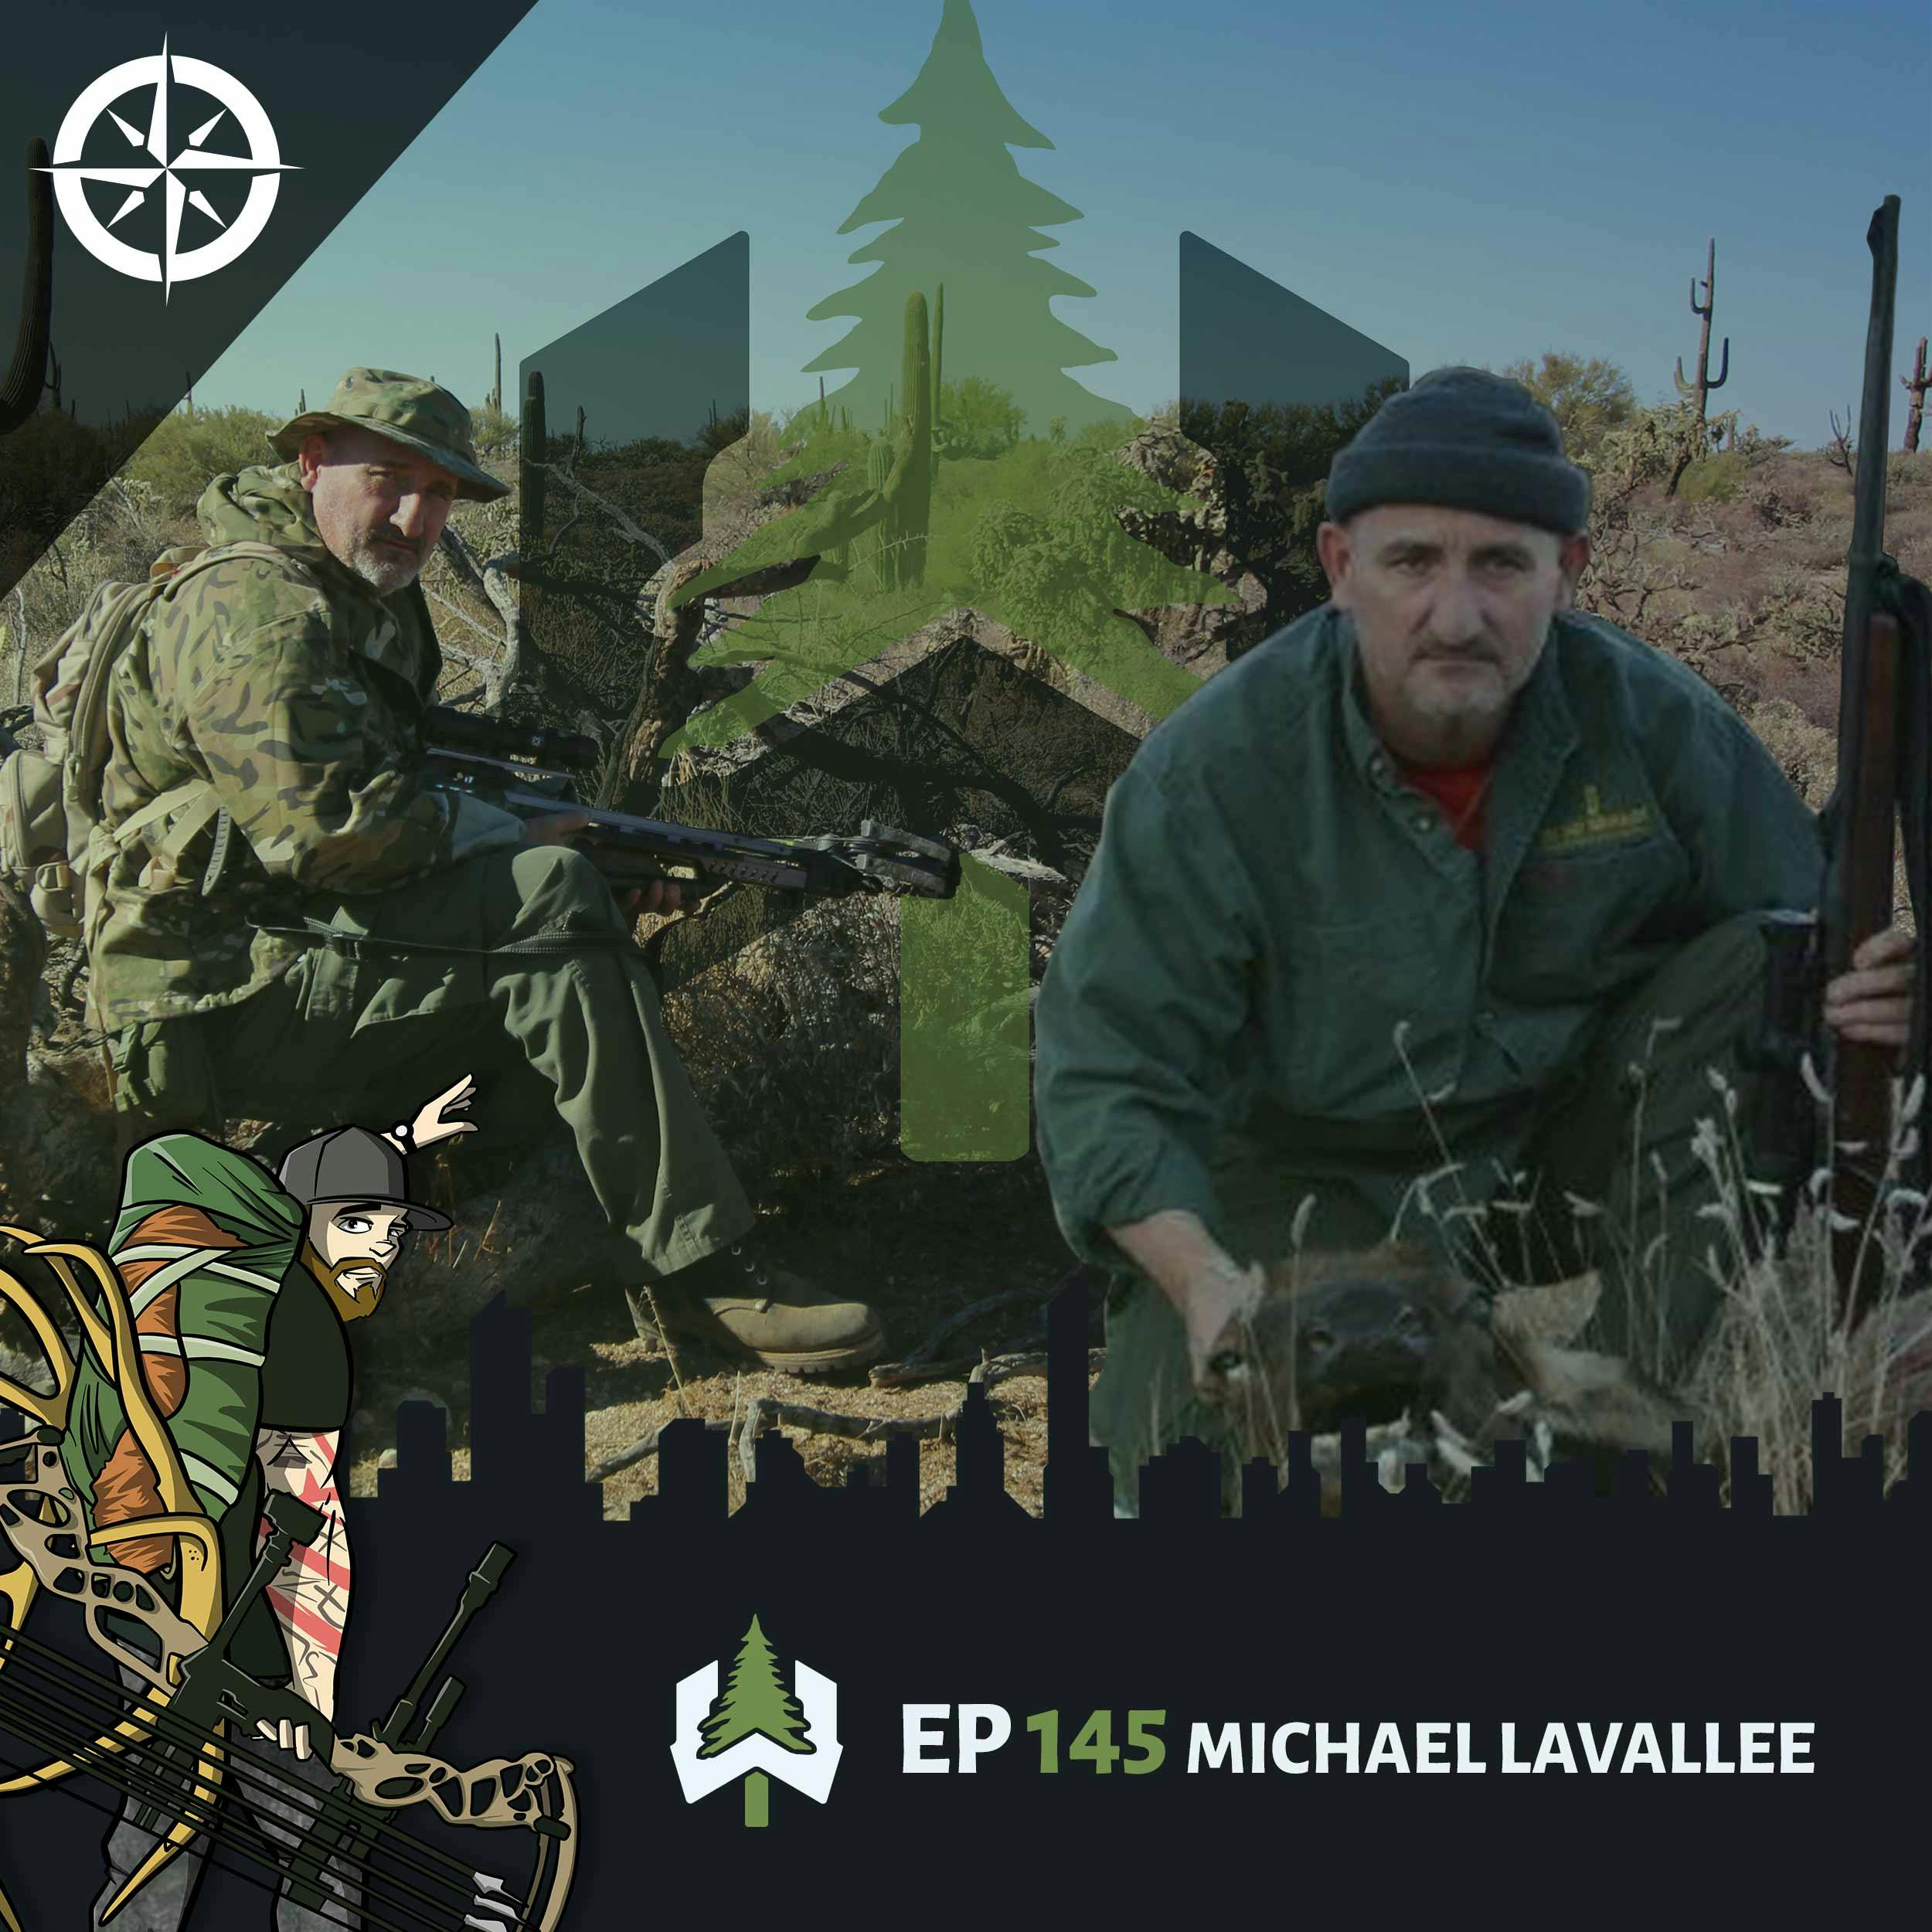 Ep 145 - Michael Lavallee, The Quiet Survivalist: Planning to Improvise is Planning to Fail